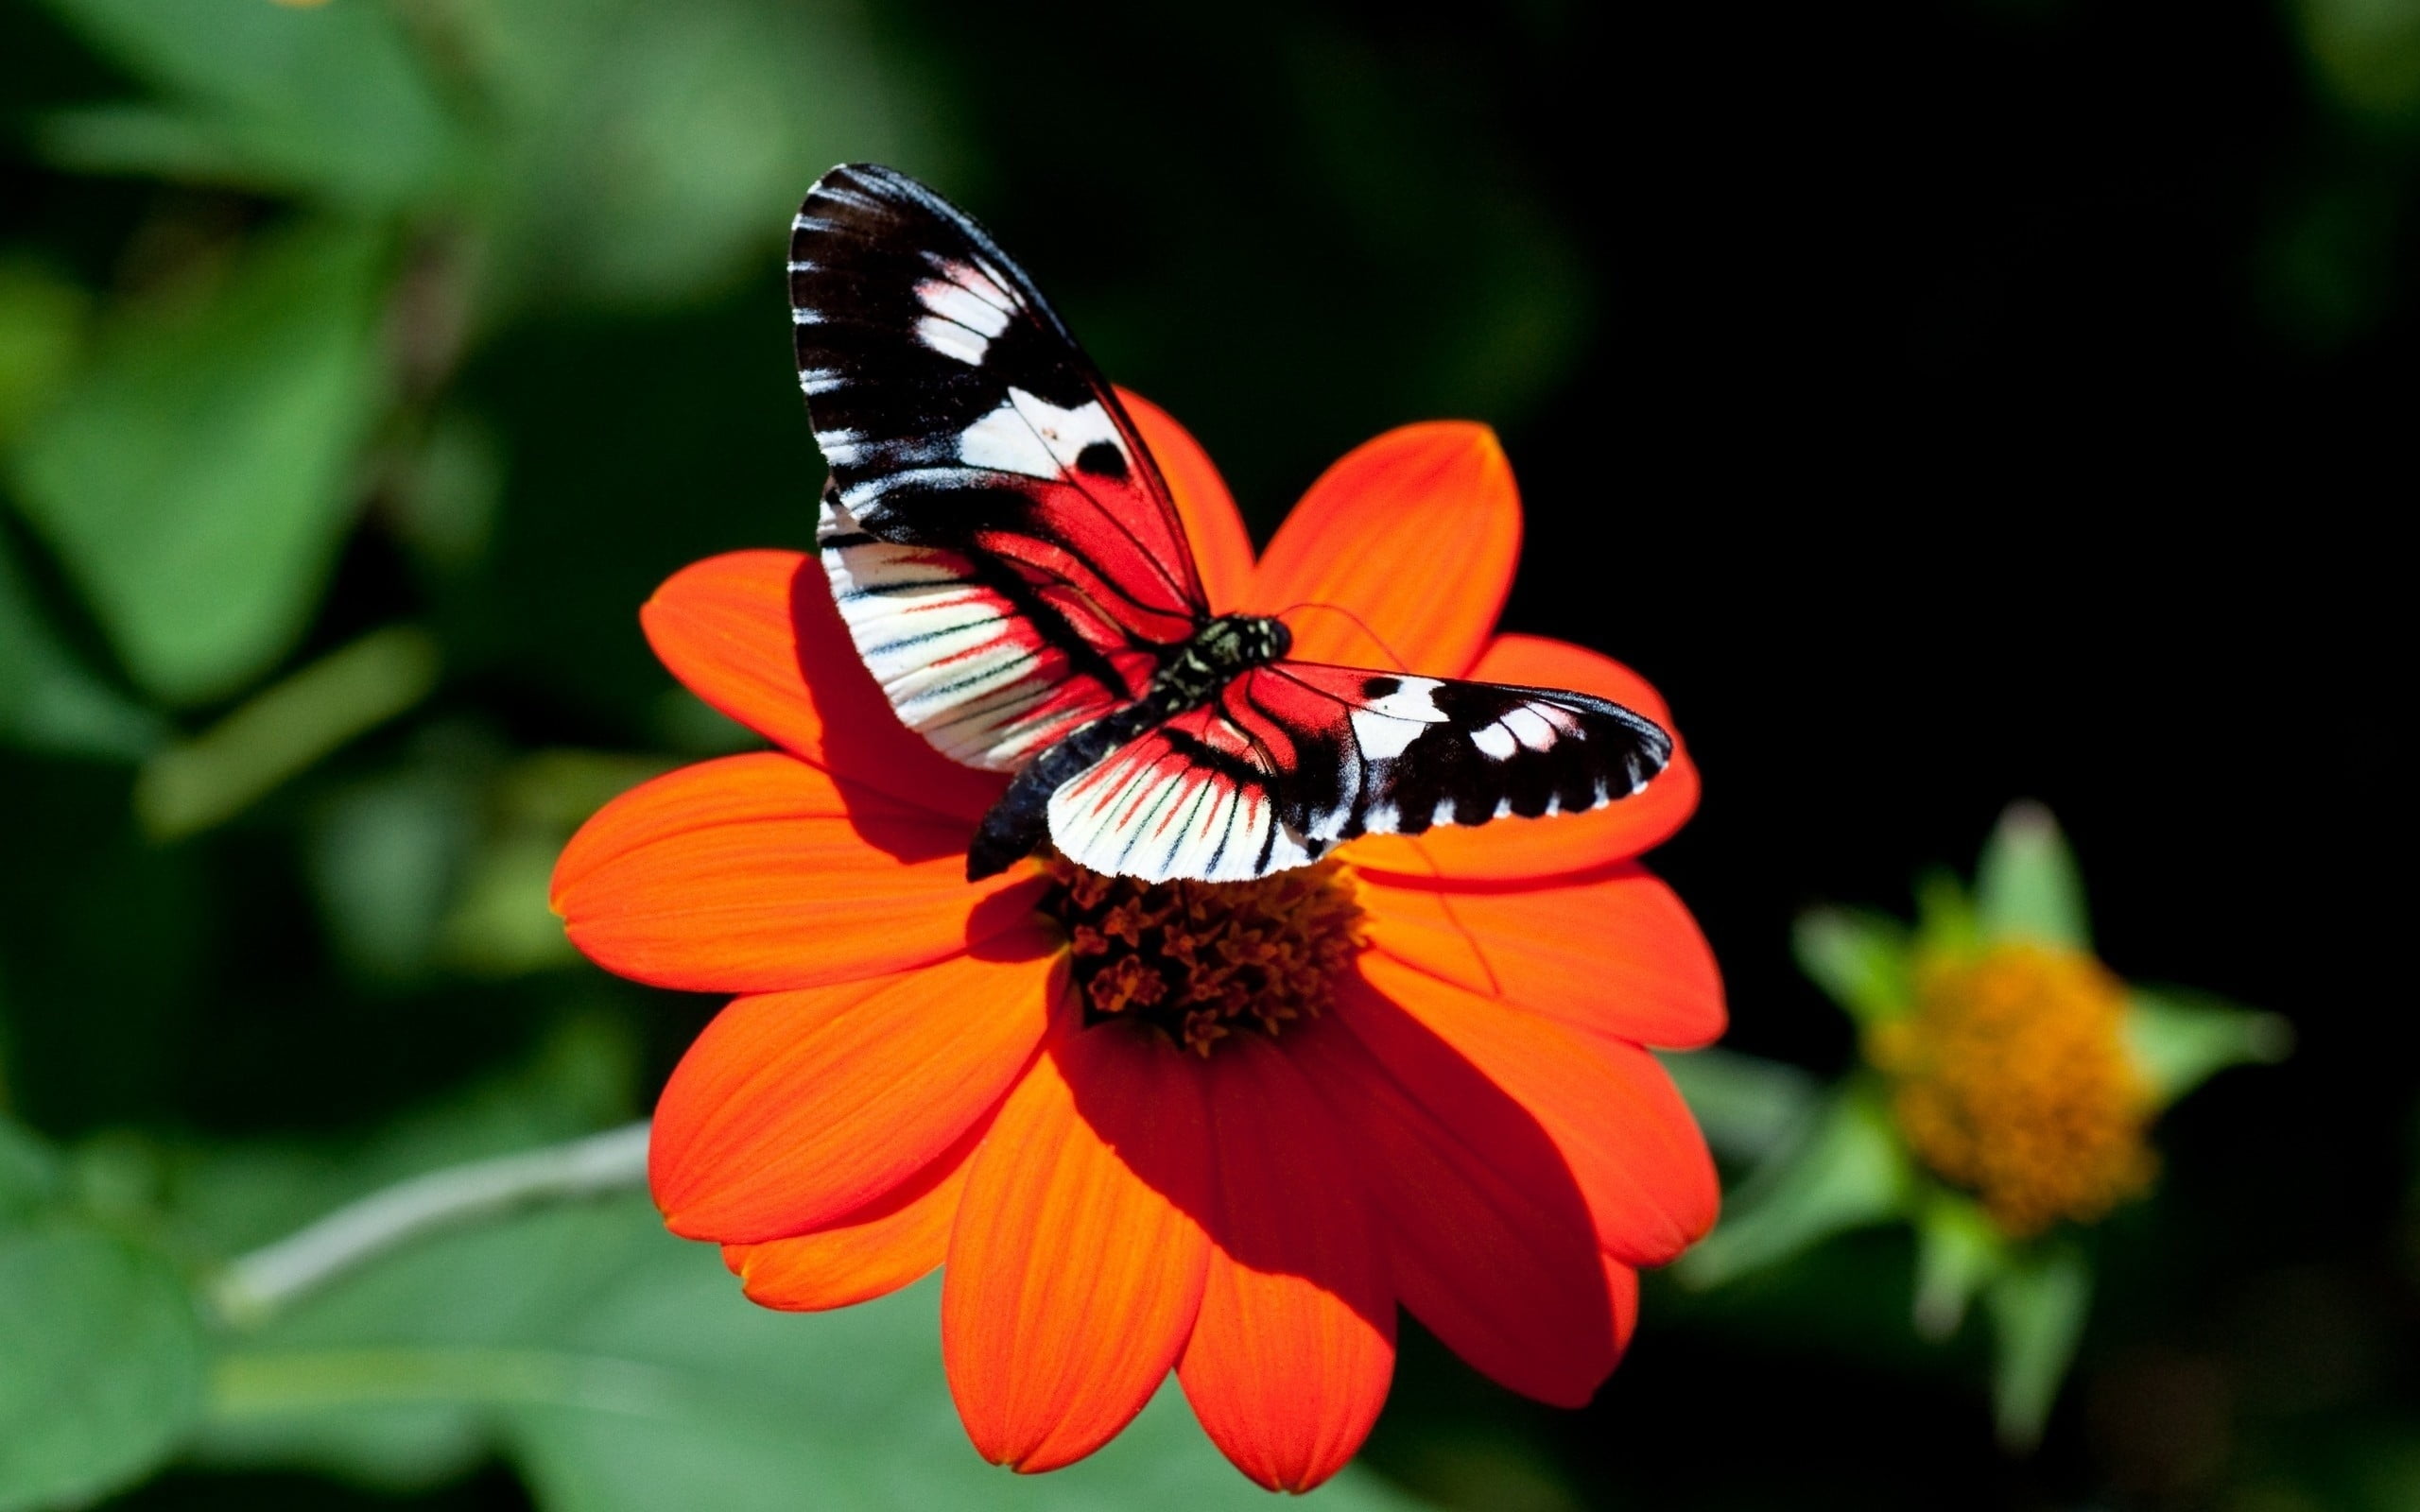 red and black butterfly hopped on orange petaled flower in closeup photo